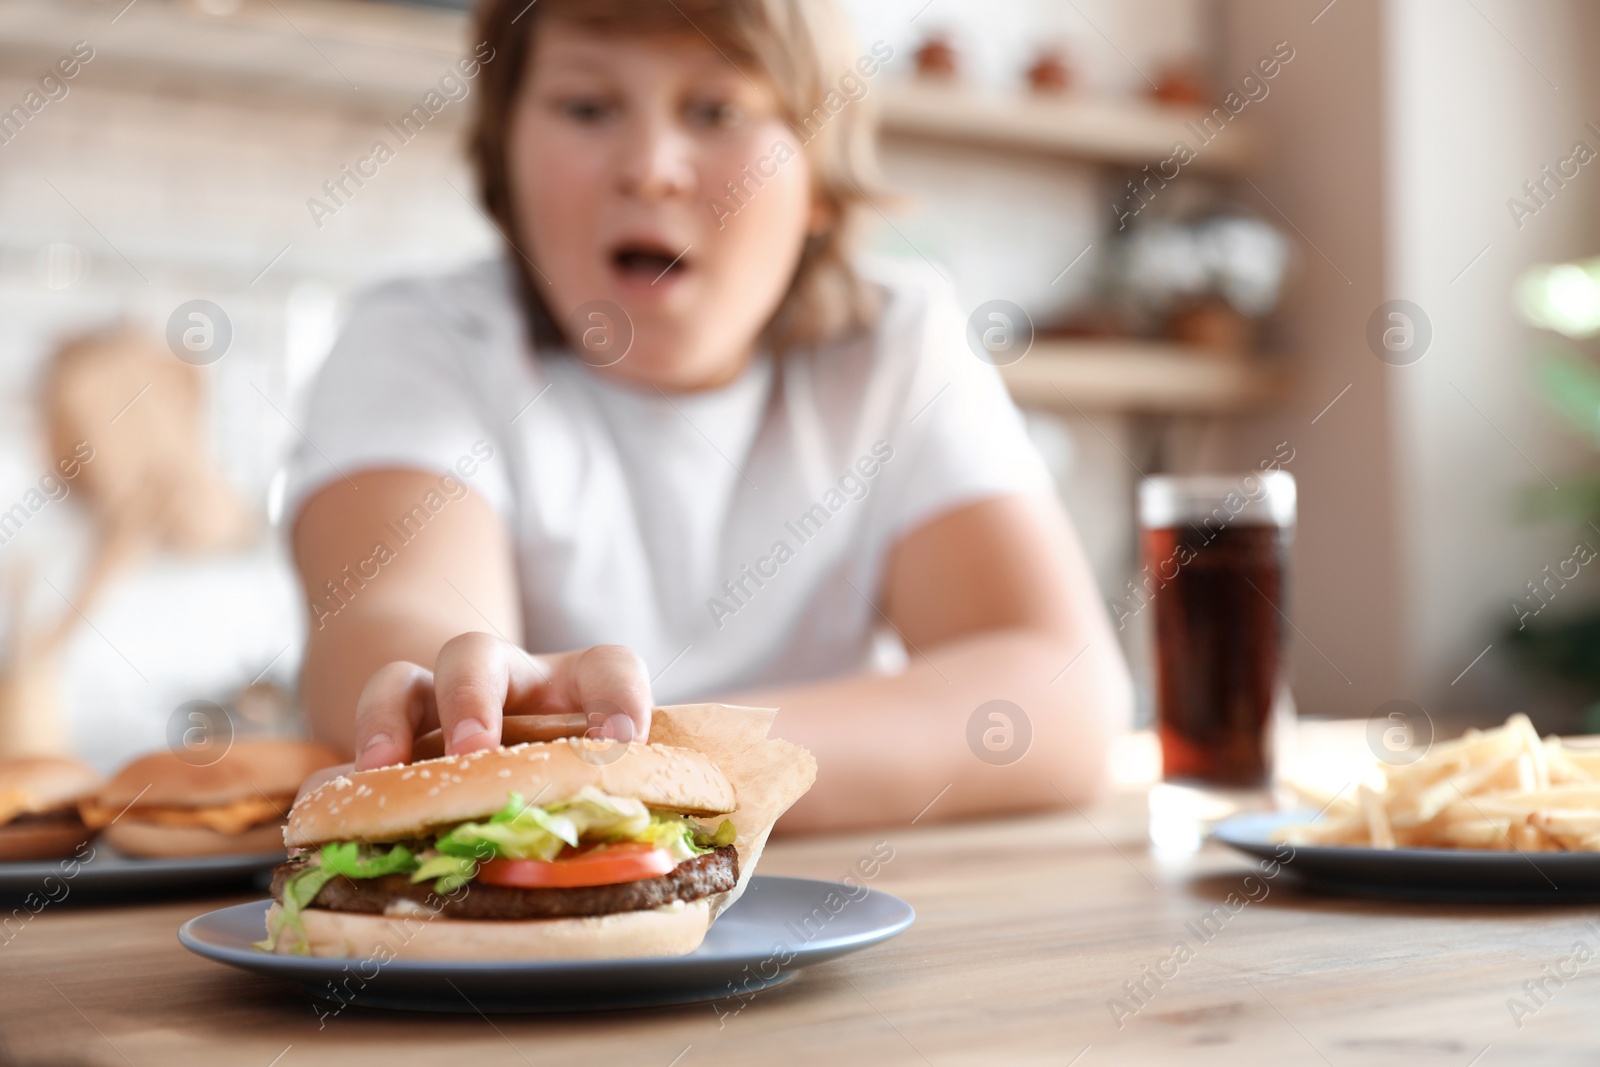 Photo of Emotional overweight boy reaching for burger at table in kitchen